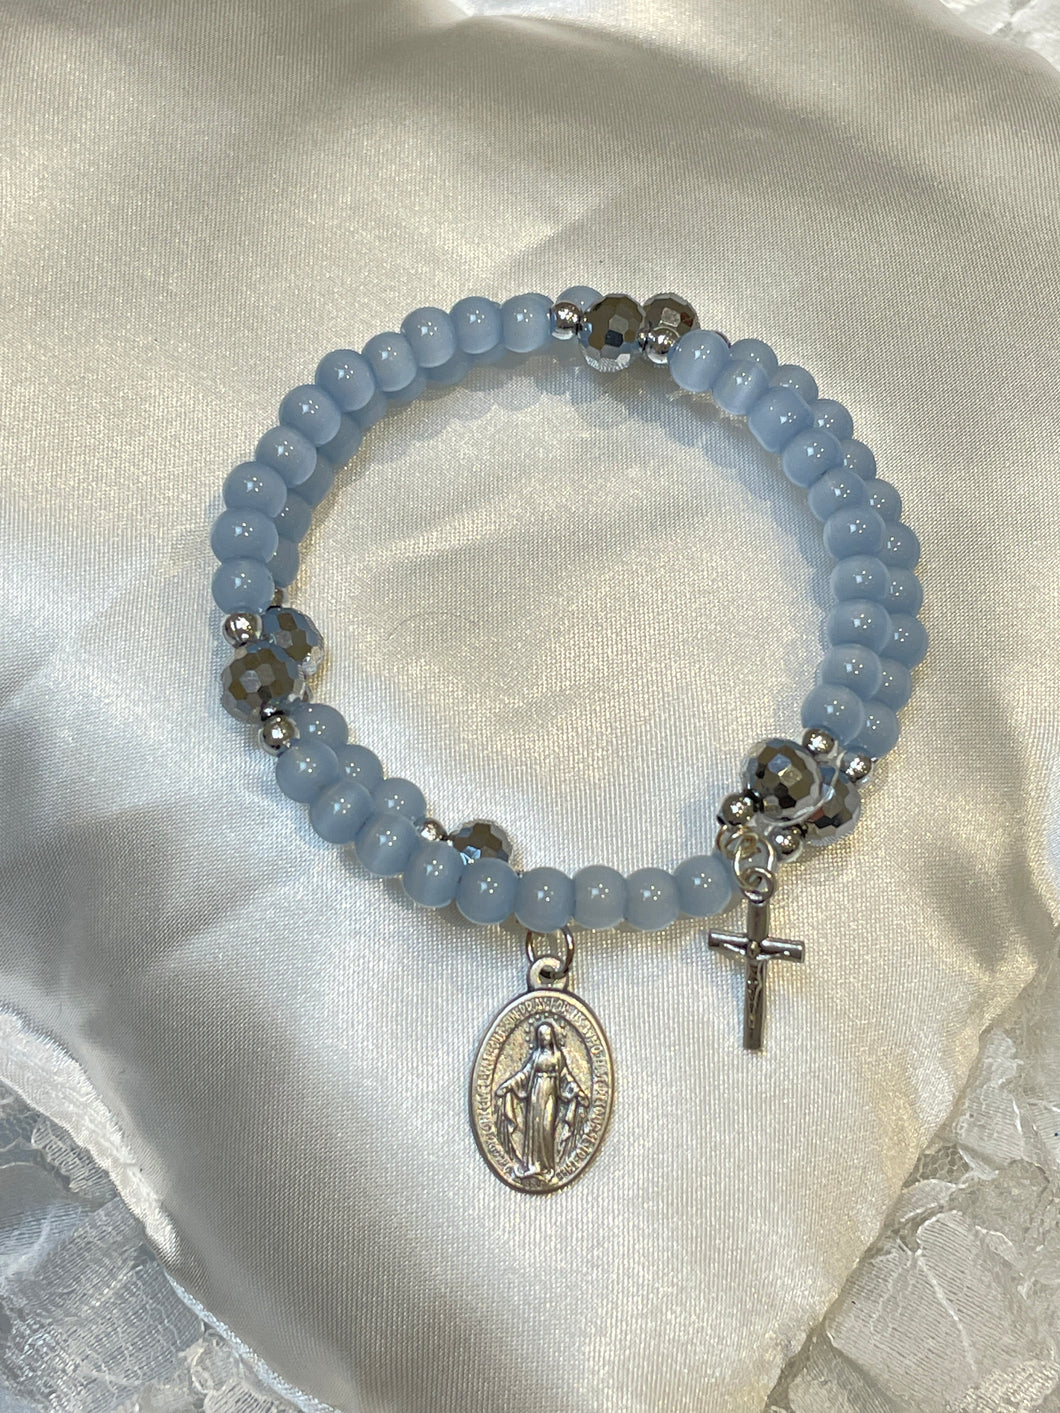 Light Blue Gemstone Rosary Bracelet with Miraculous Medal and Crucifix Charms